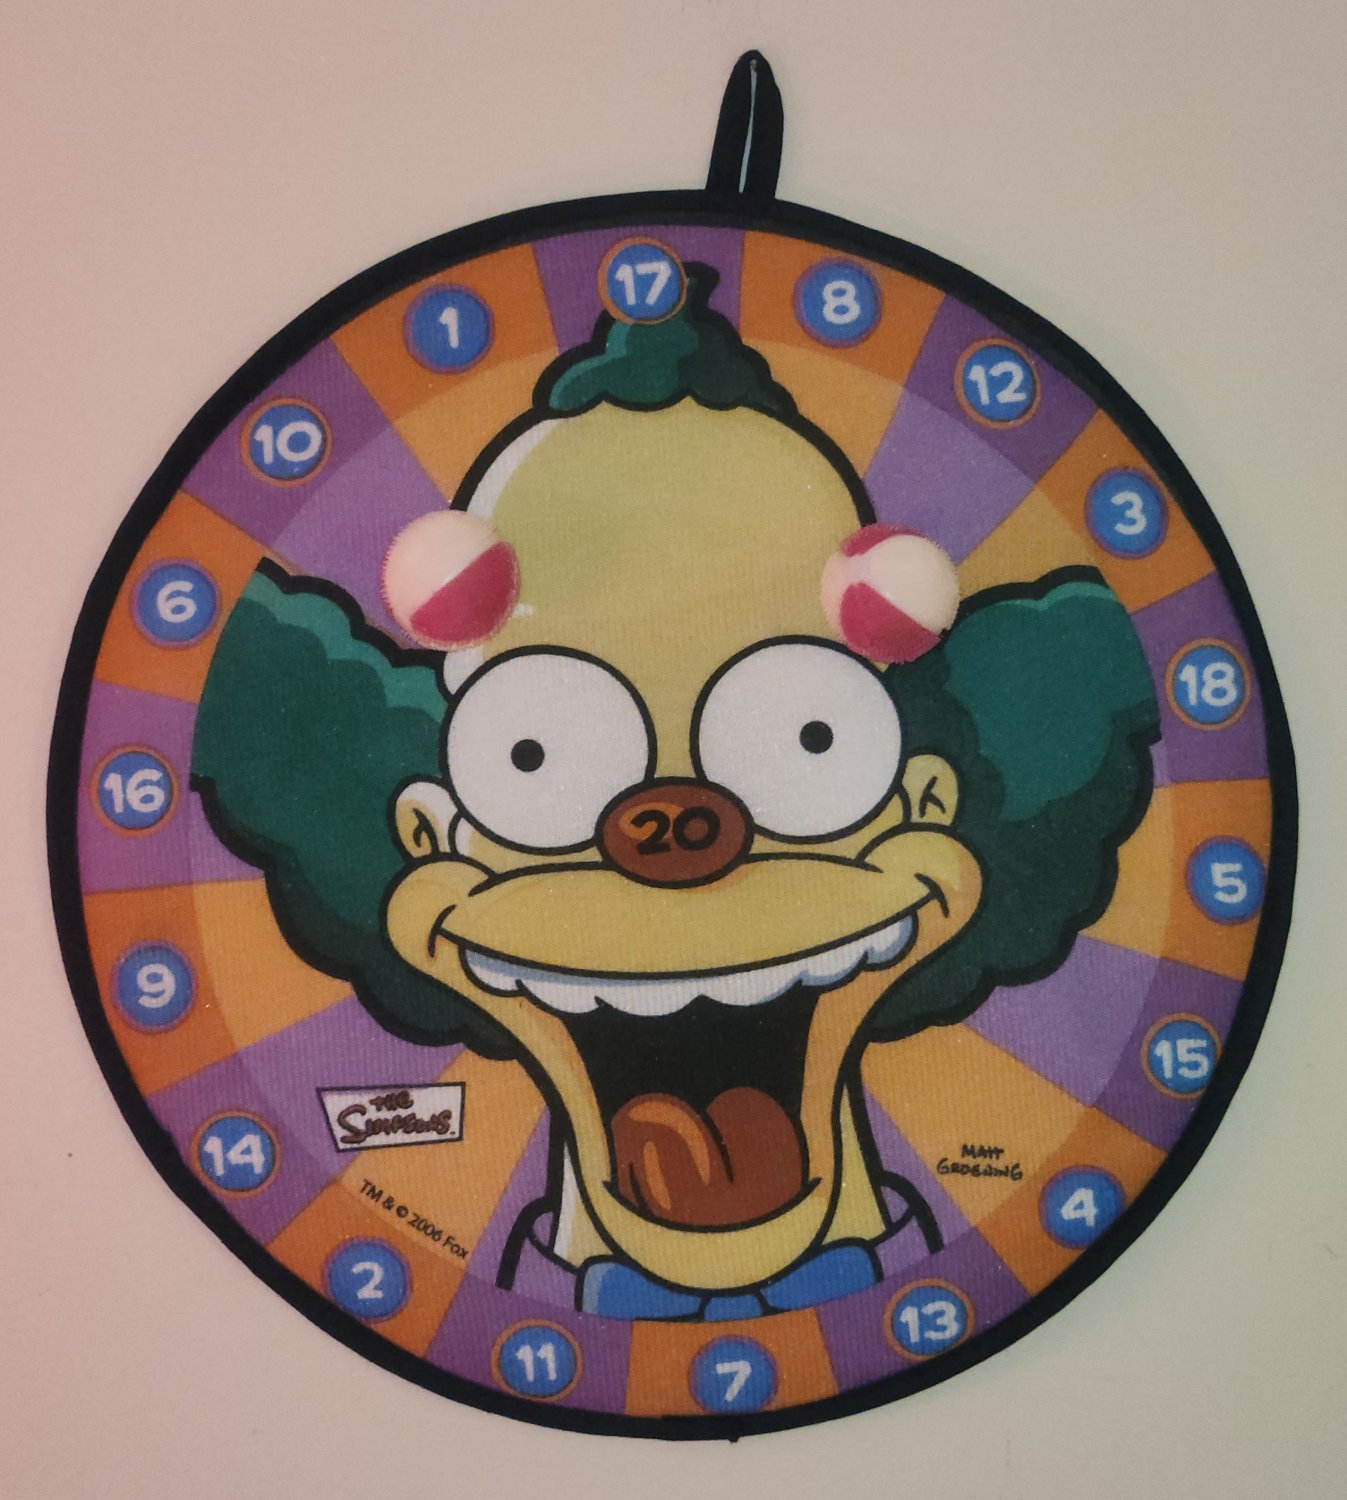 The Simpsons Krusty the Clown Velcro Ball Darts Game 2006 Cardinal Industries